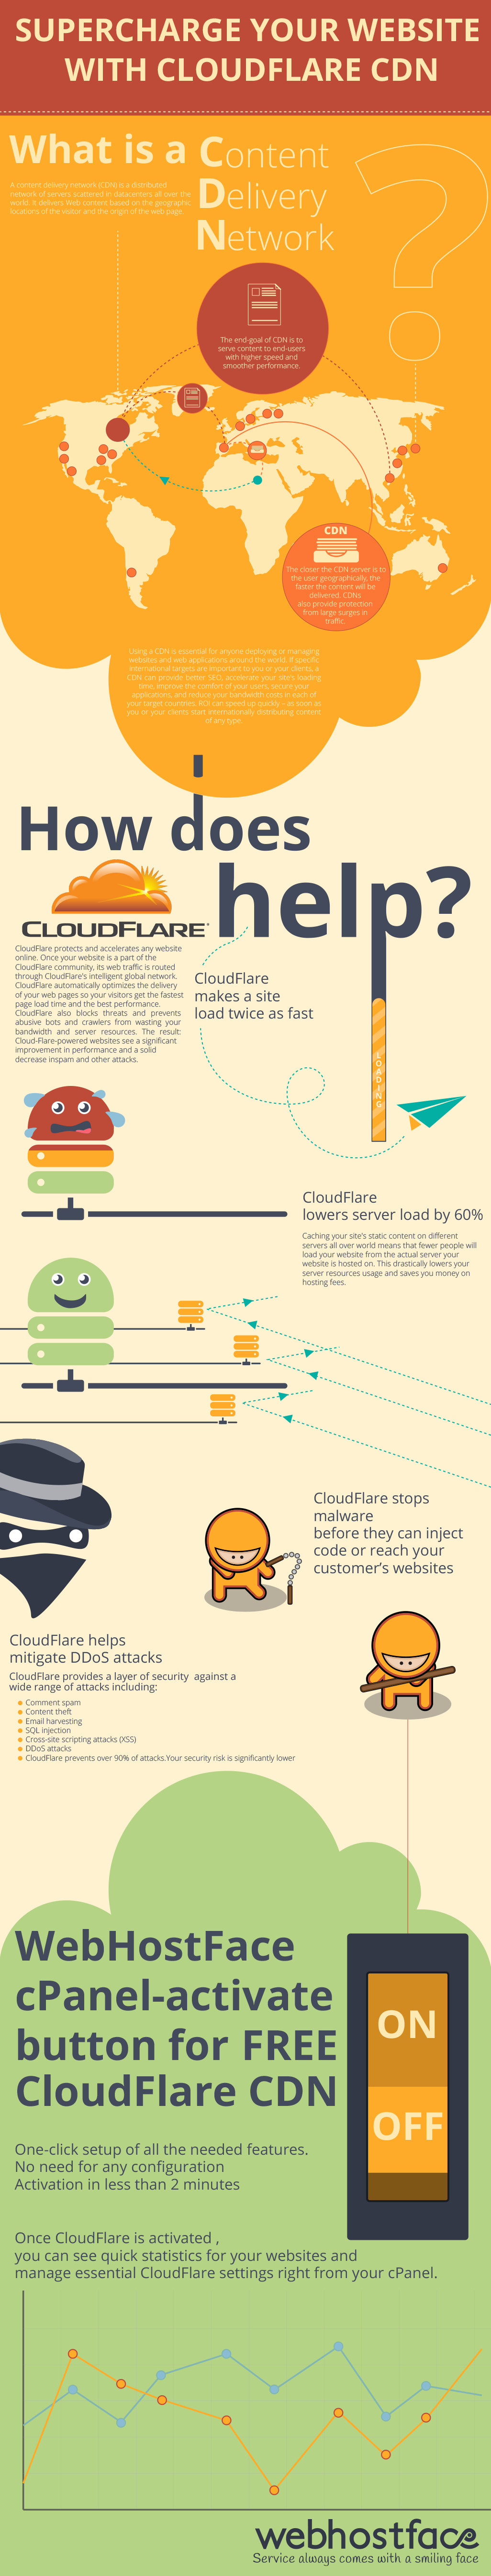 Supercharge Your Website With CloudFlare CDN